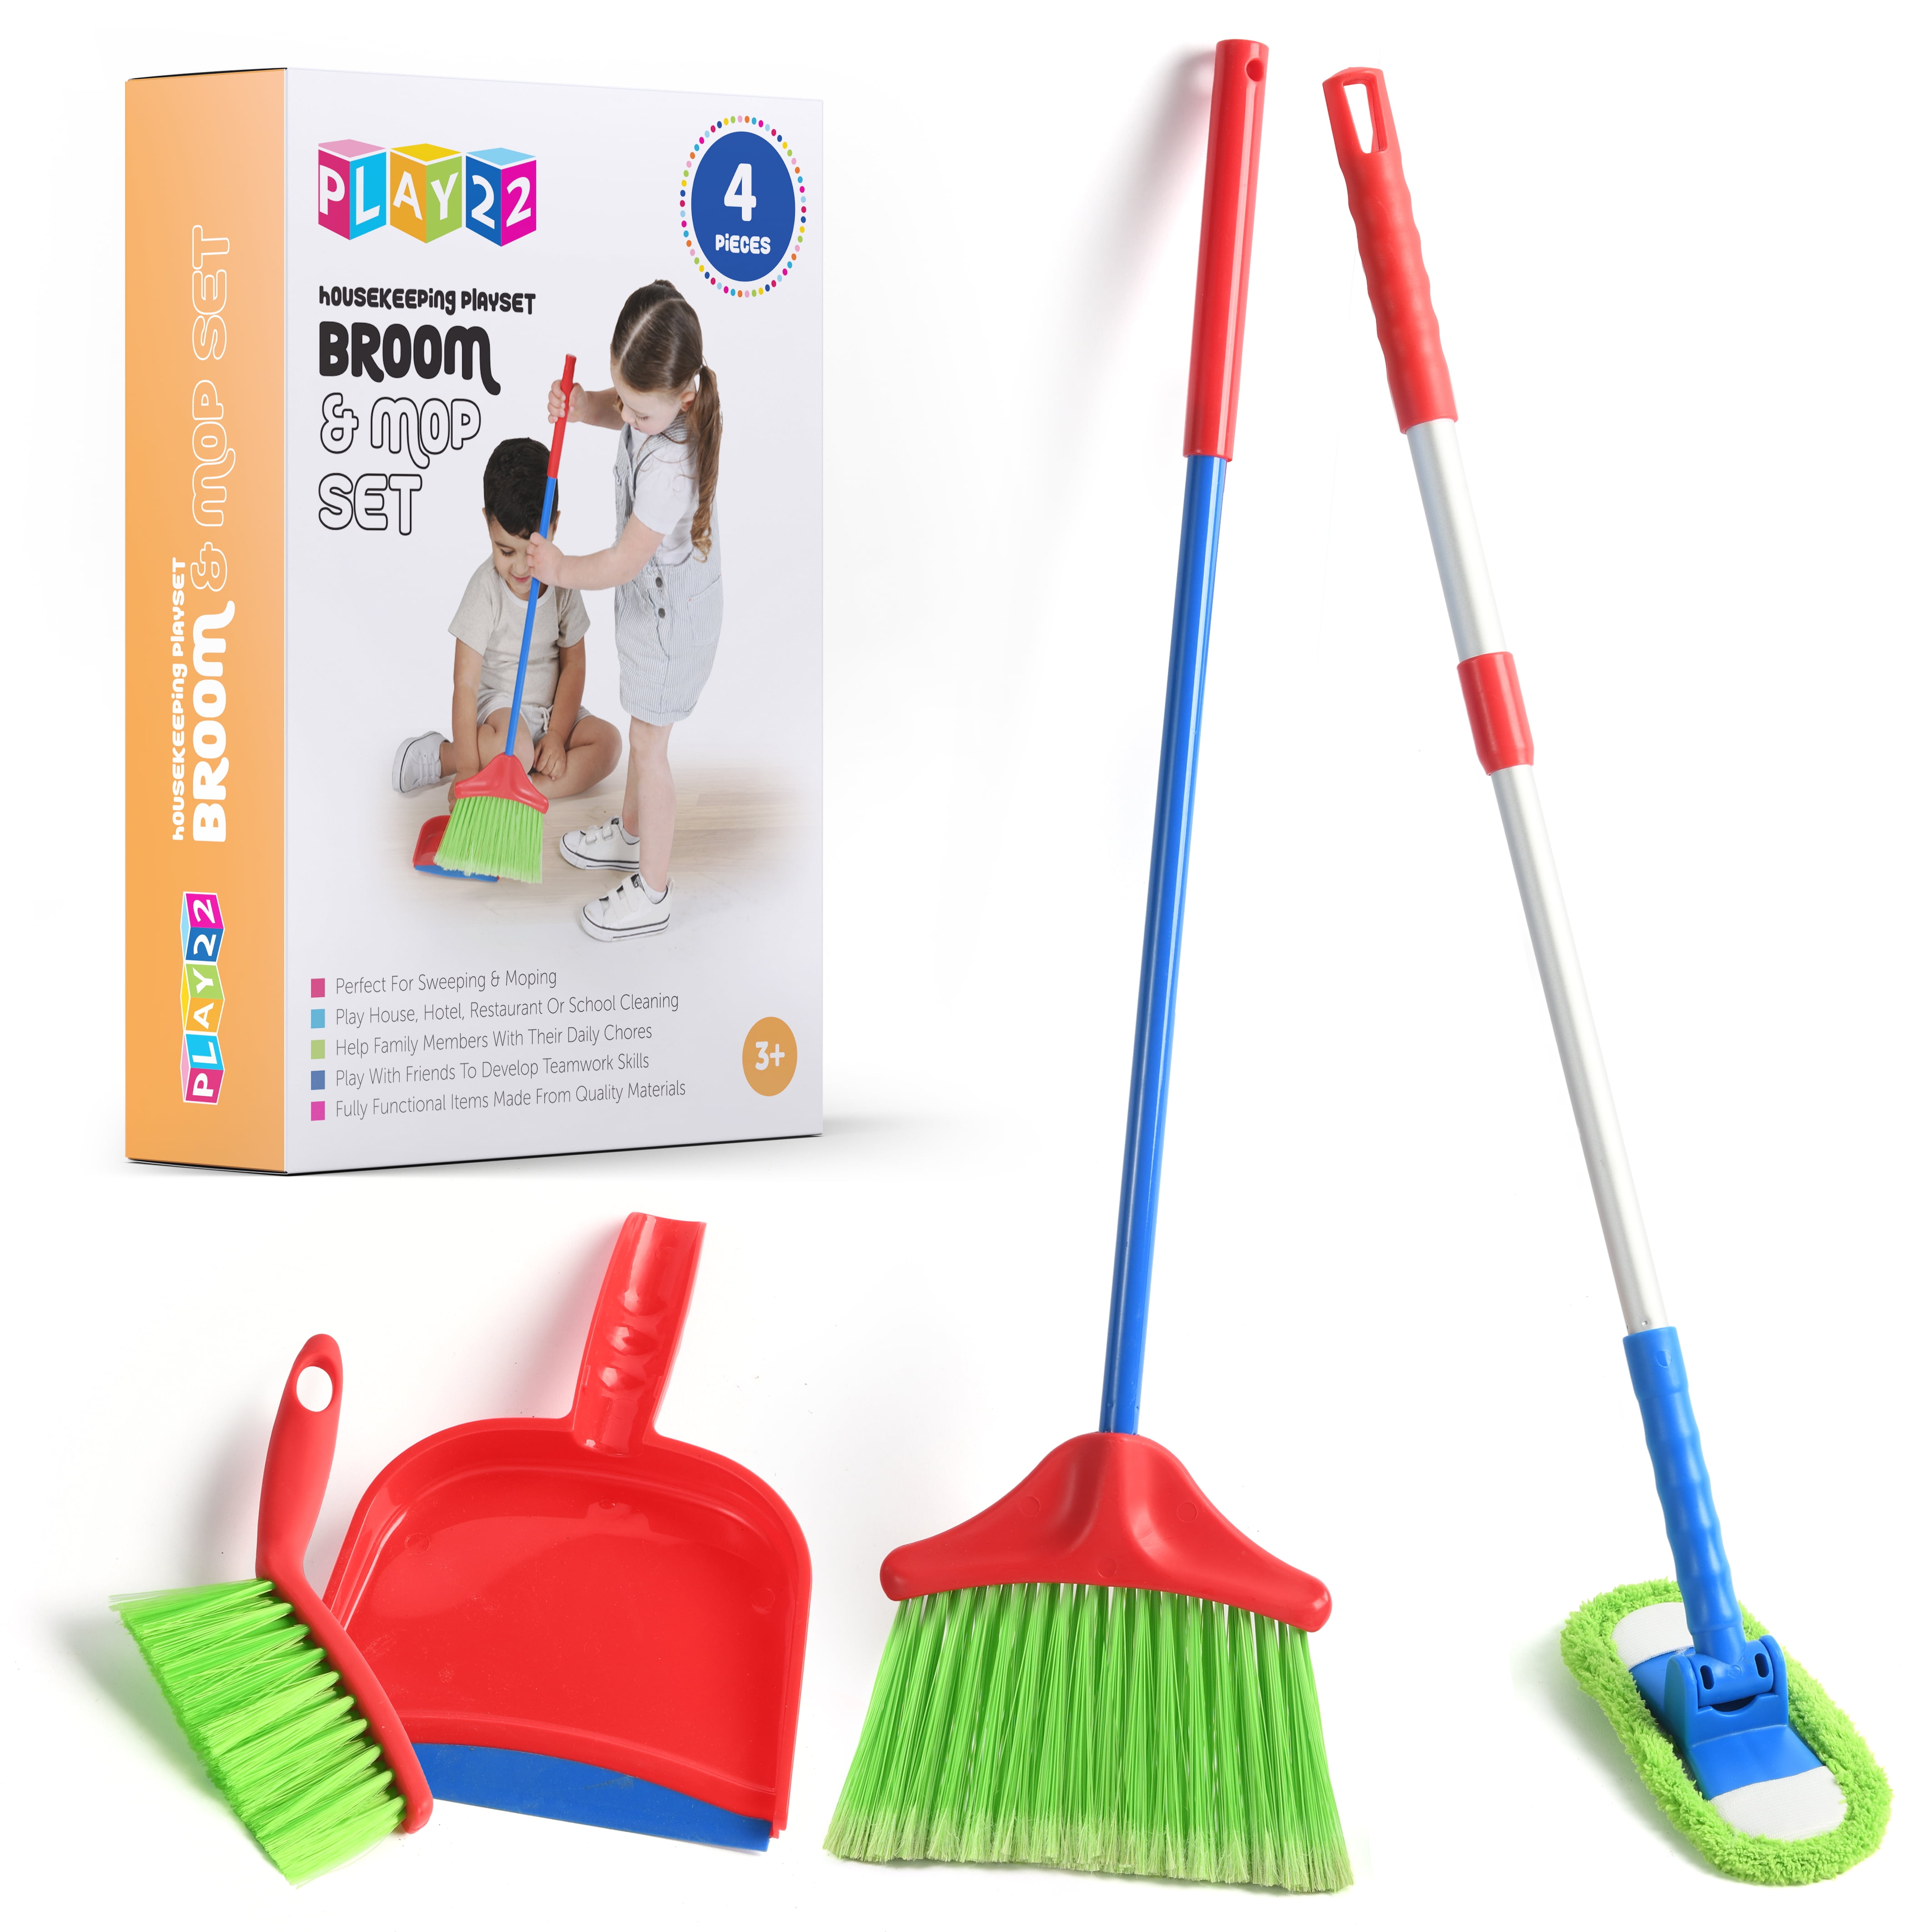 Meland Kids Cleaning Set - 8Pcs Toddler Broom And Cleaning Set